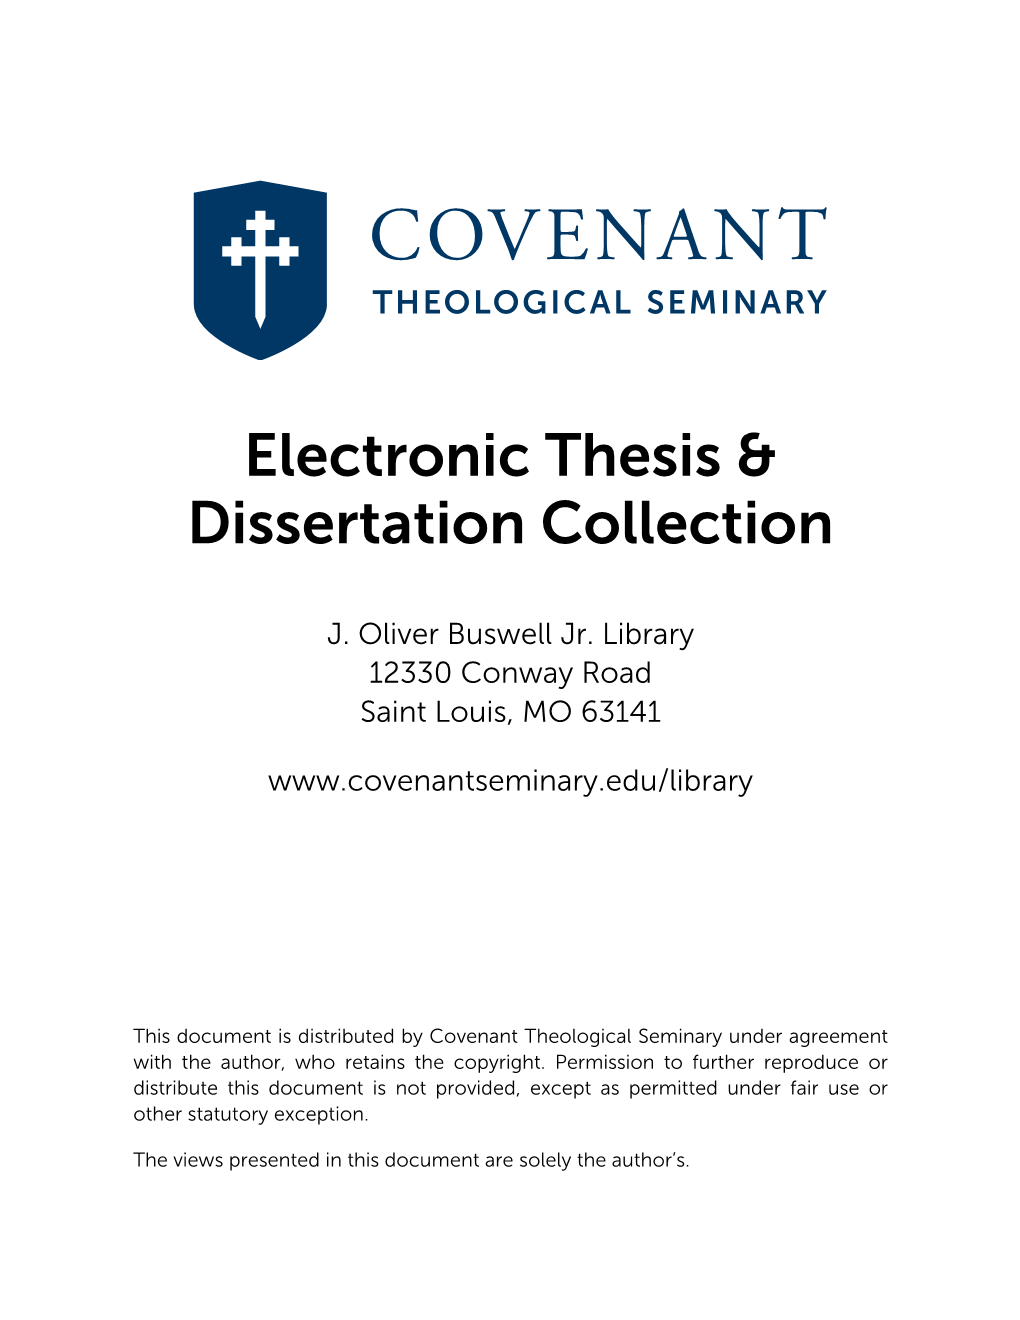 Electronic Thesis & Dissertation Collection